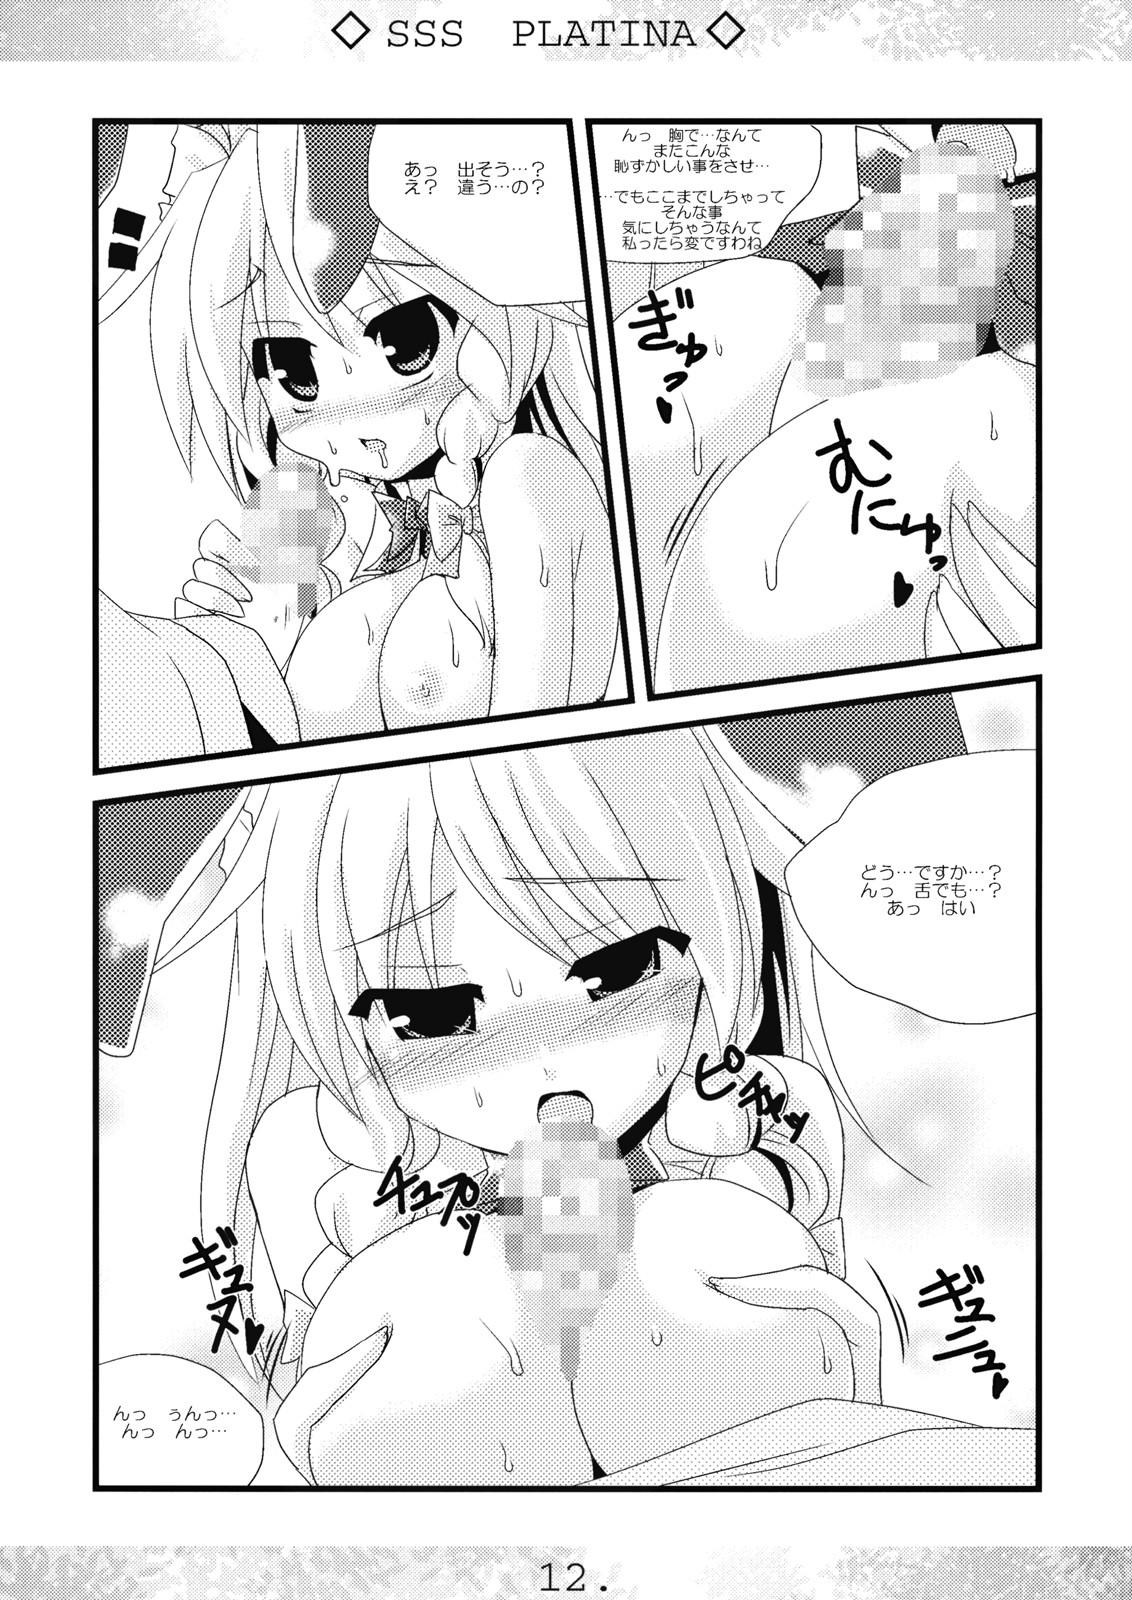 Couple Sex SSS PLATINA - Touhou project Cum Swallowing - Page 12